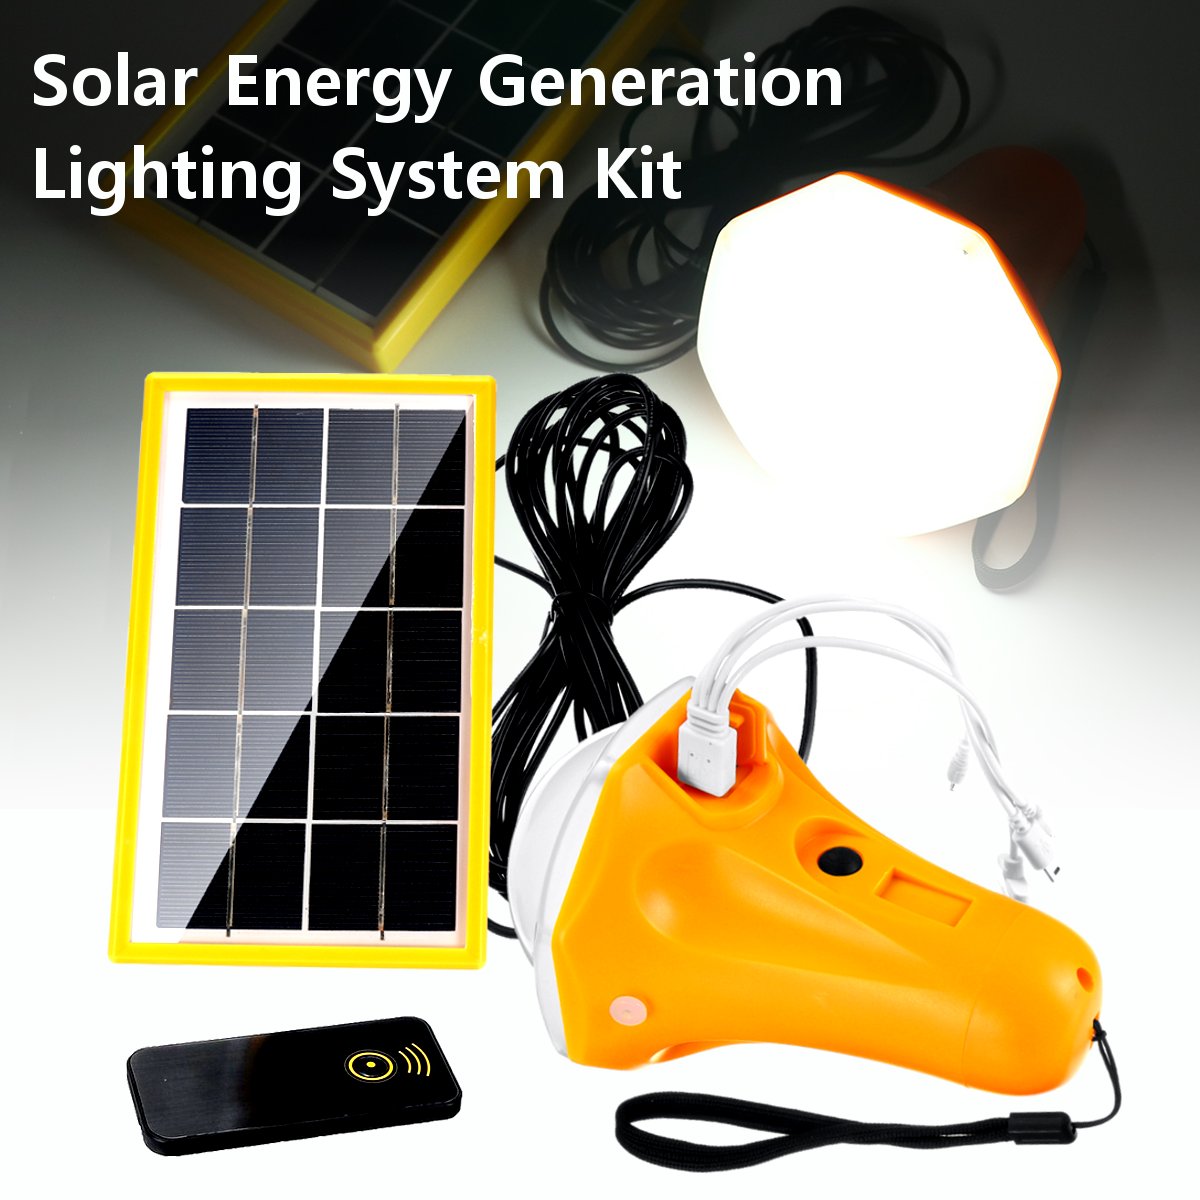 200LM-Solar-Panel-Bulb-Power-5-Modes-DC-Lighting-System-Kits-Emergency-Generator-With-Remote-Control-1460417-1